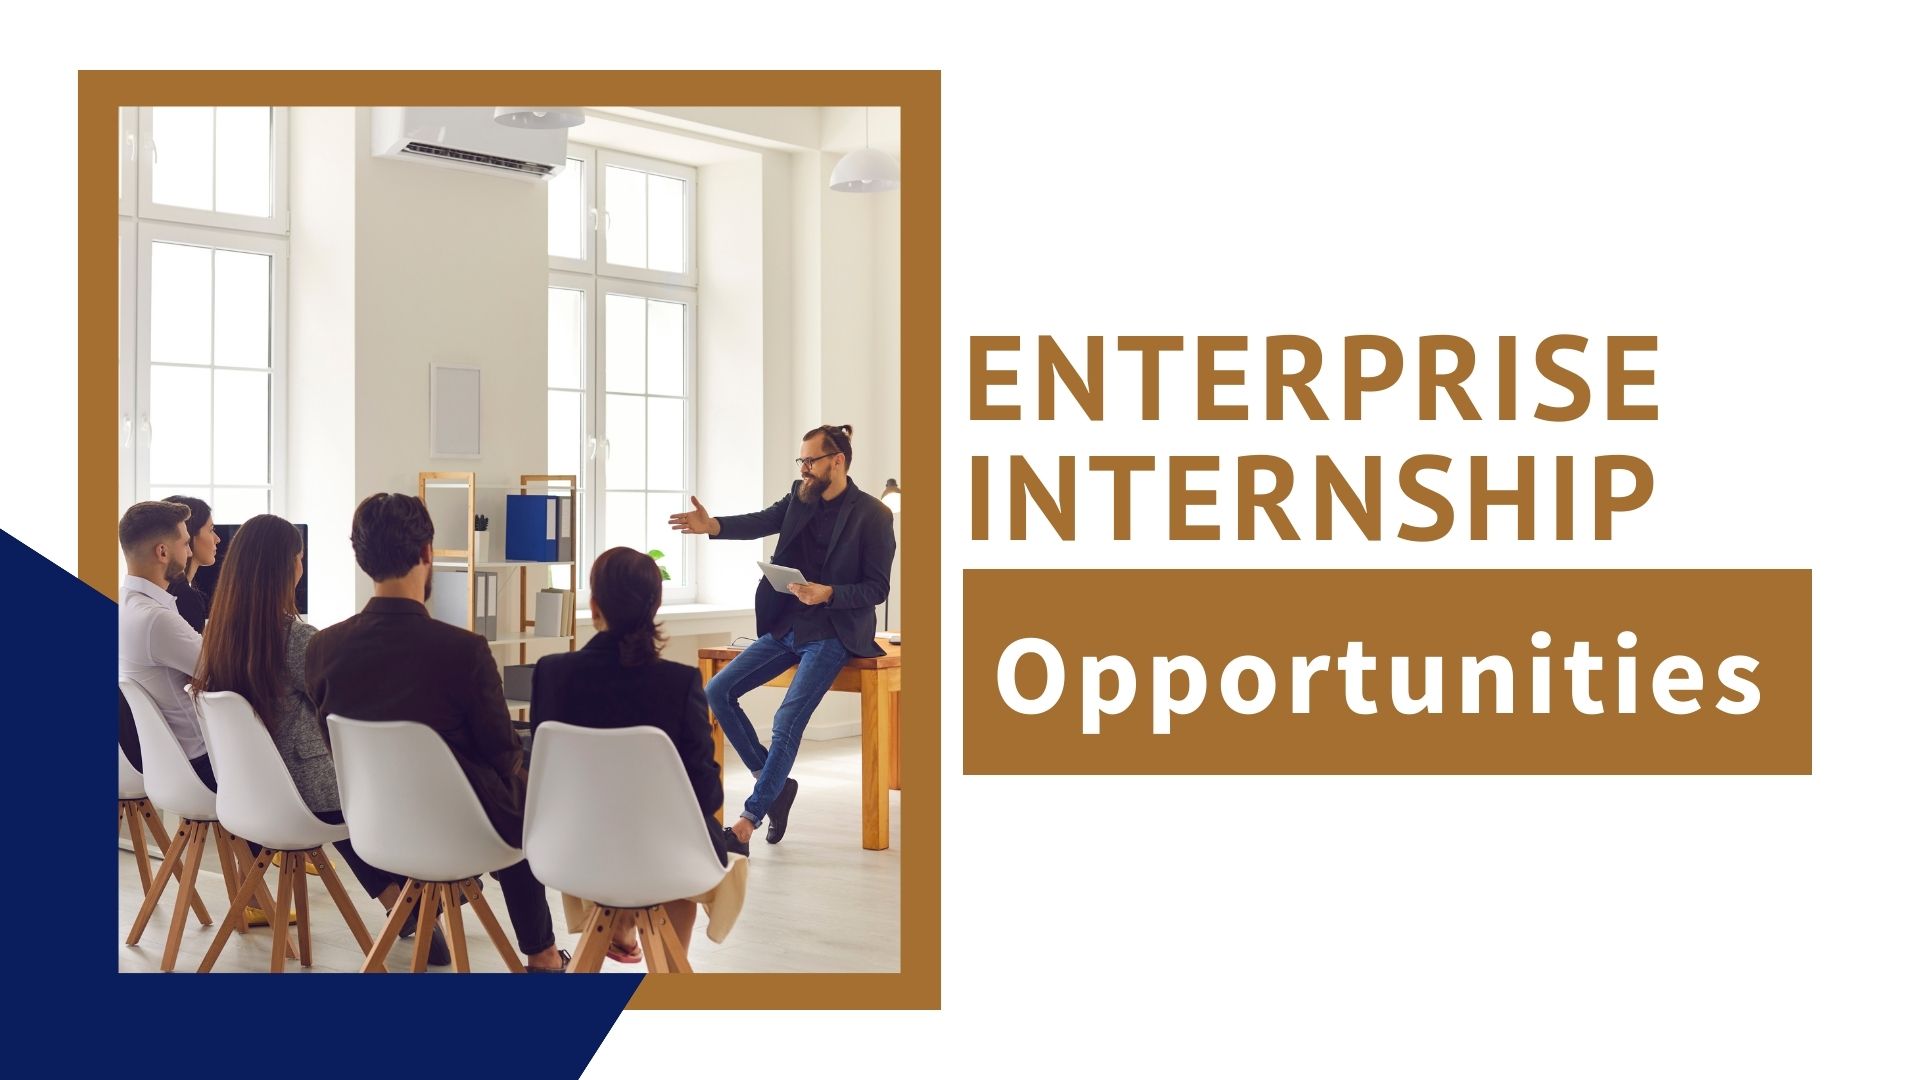 Internship Opportunities: Connecting Students with Enterprise Experiences